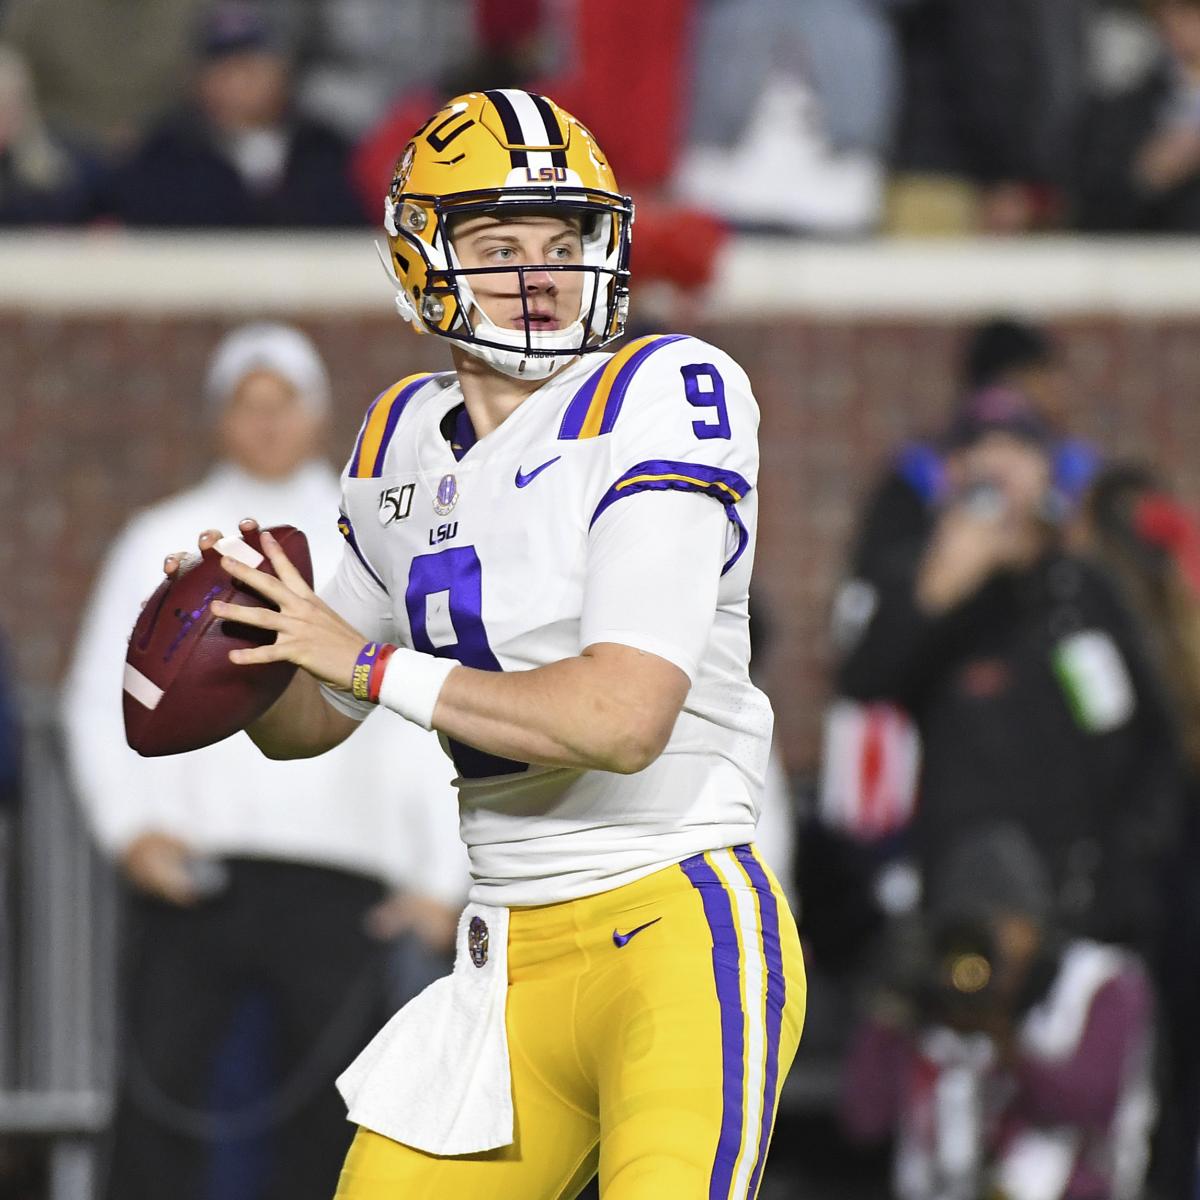 Bowl Games 2019-20: Schedule, TV Info and Predictions for All Games | Bleacher Report | Latest ...